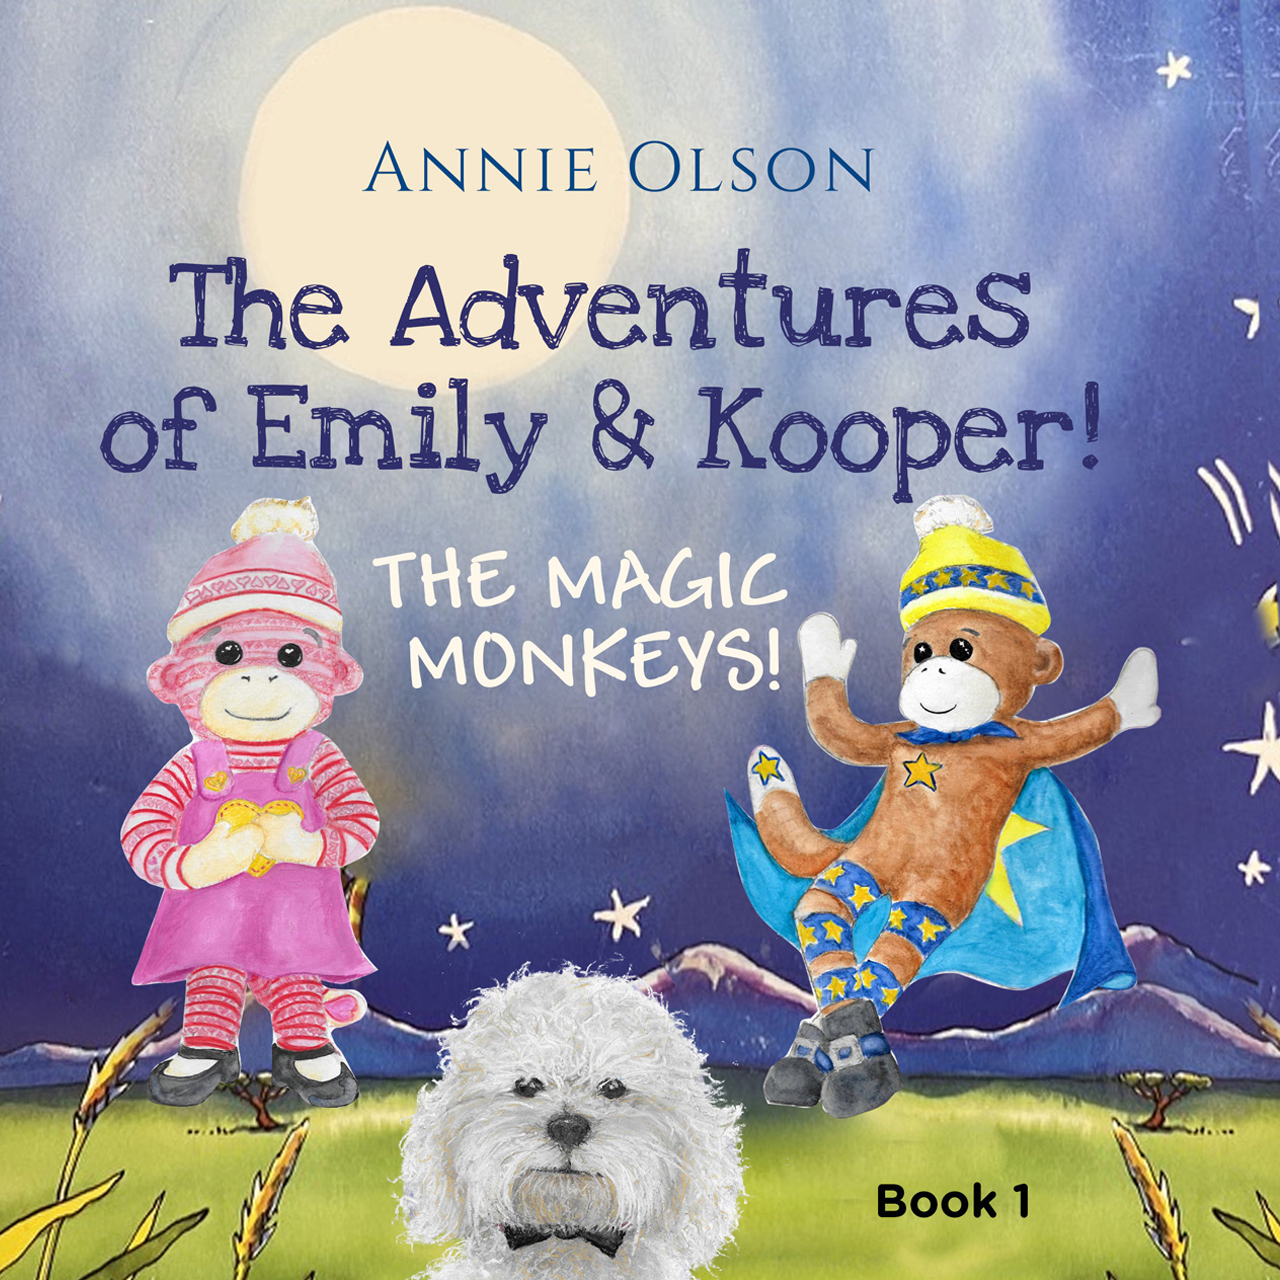 The Adventures of Emily and Kooper